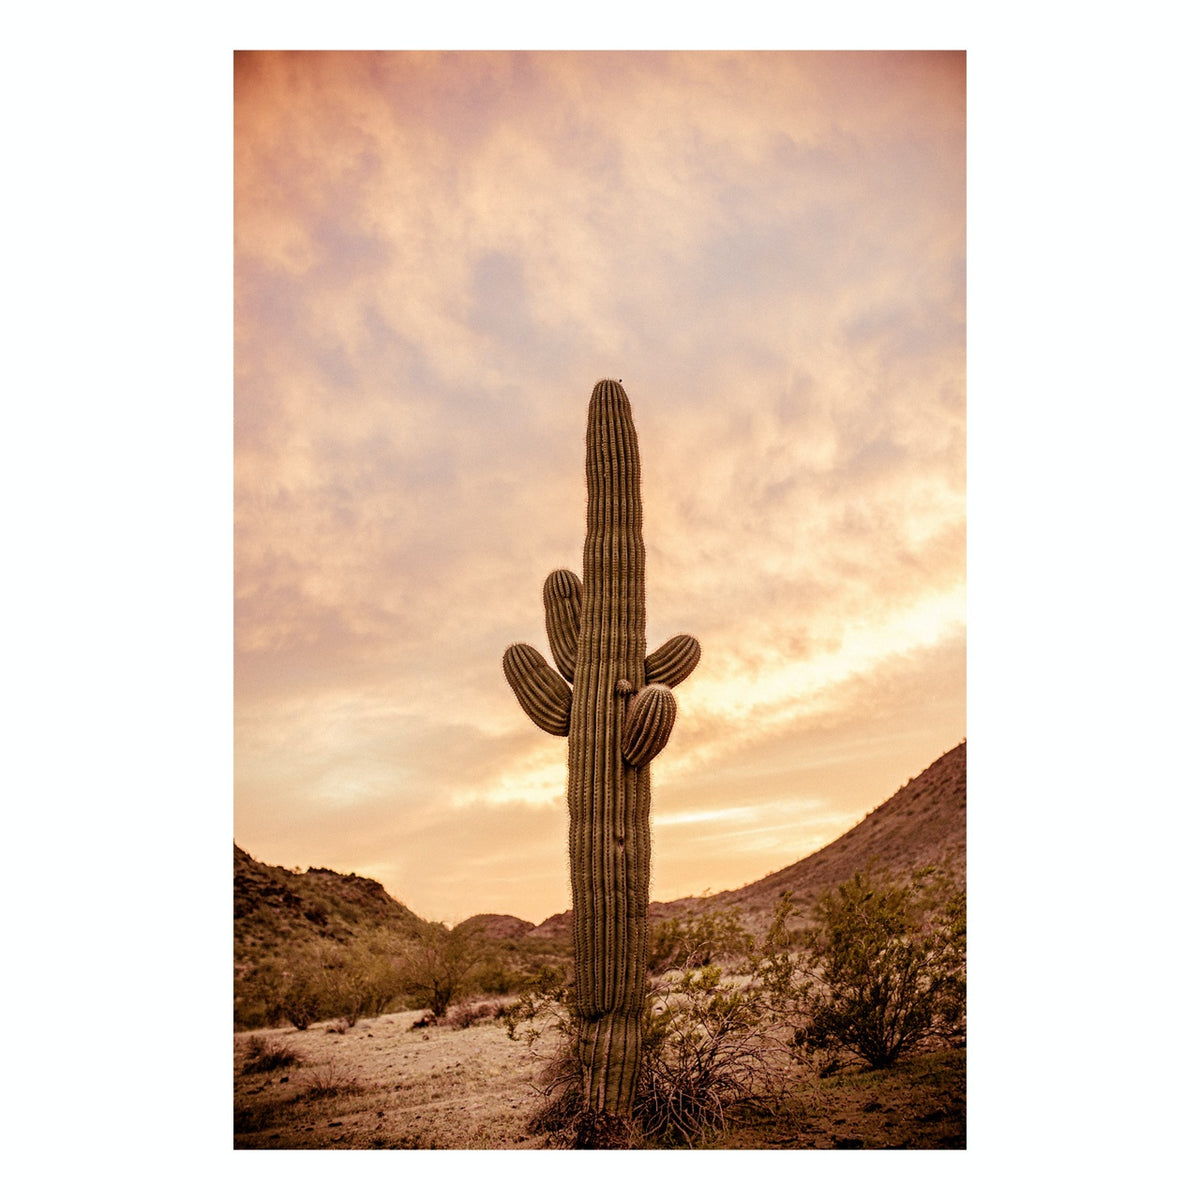 Fine Art Prints - "Lonely Cactus Of Route 10" | Nature Photography Prints